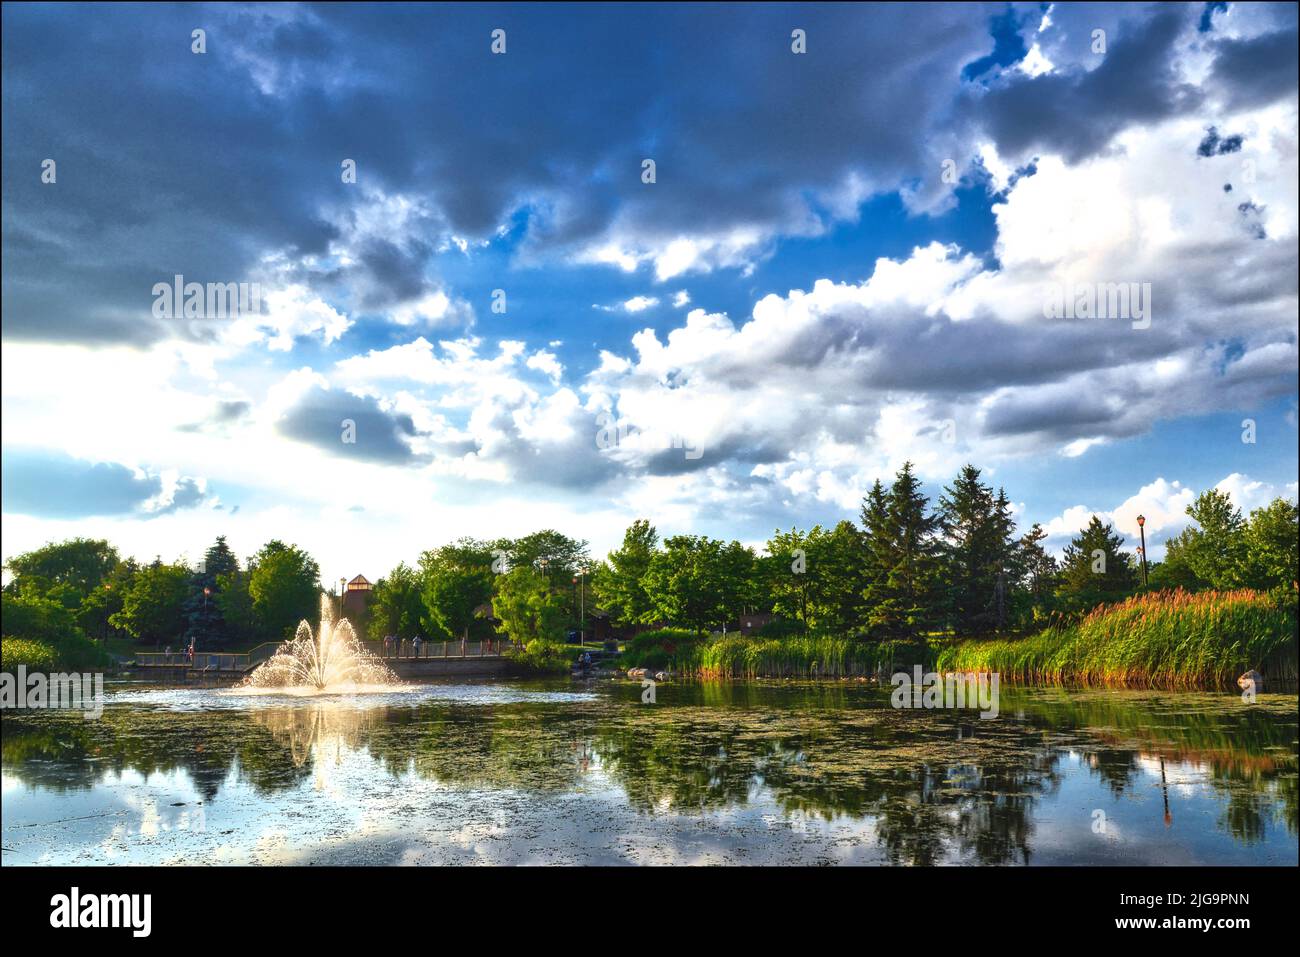 Sunset landscape of a public park with pond and fountain in Toronto, Ontario, Canada. Stock Photo